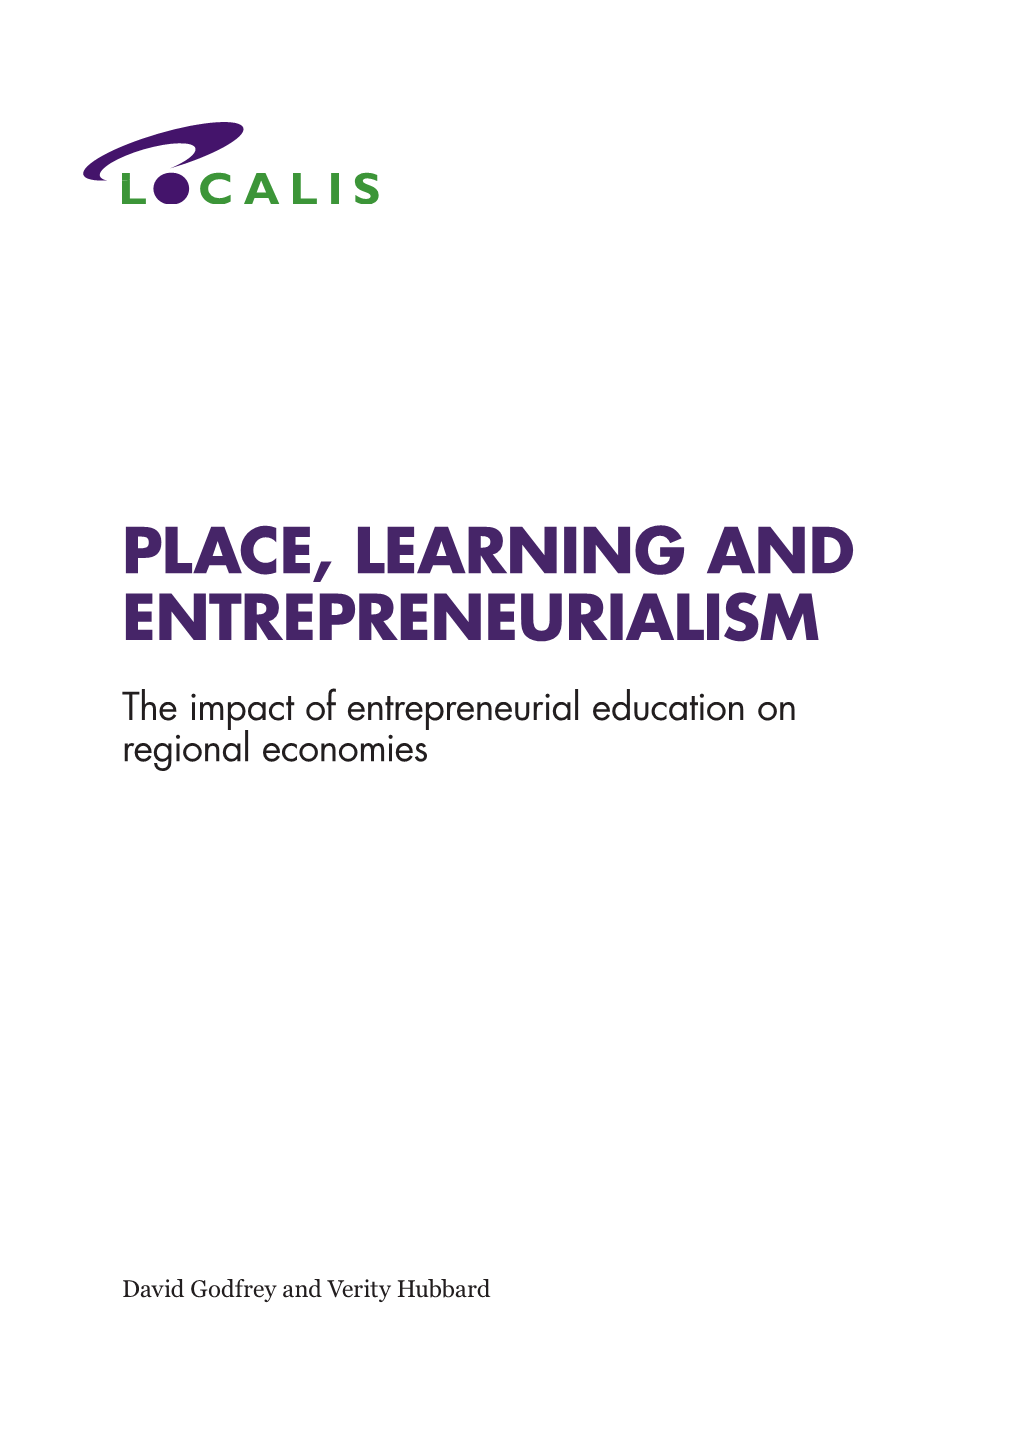 PLACE, LEARNING and ENTREPRENEURIALISM the Impact of Entrepreneurial Education on Regional Economies